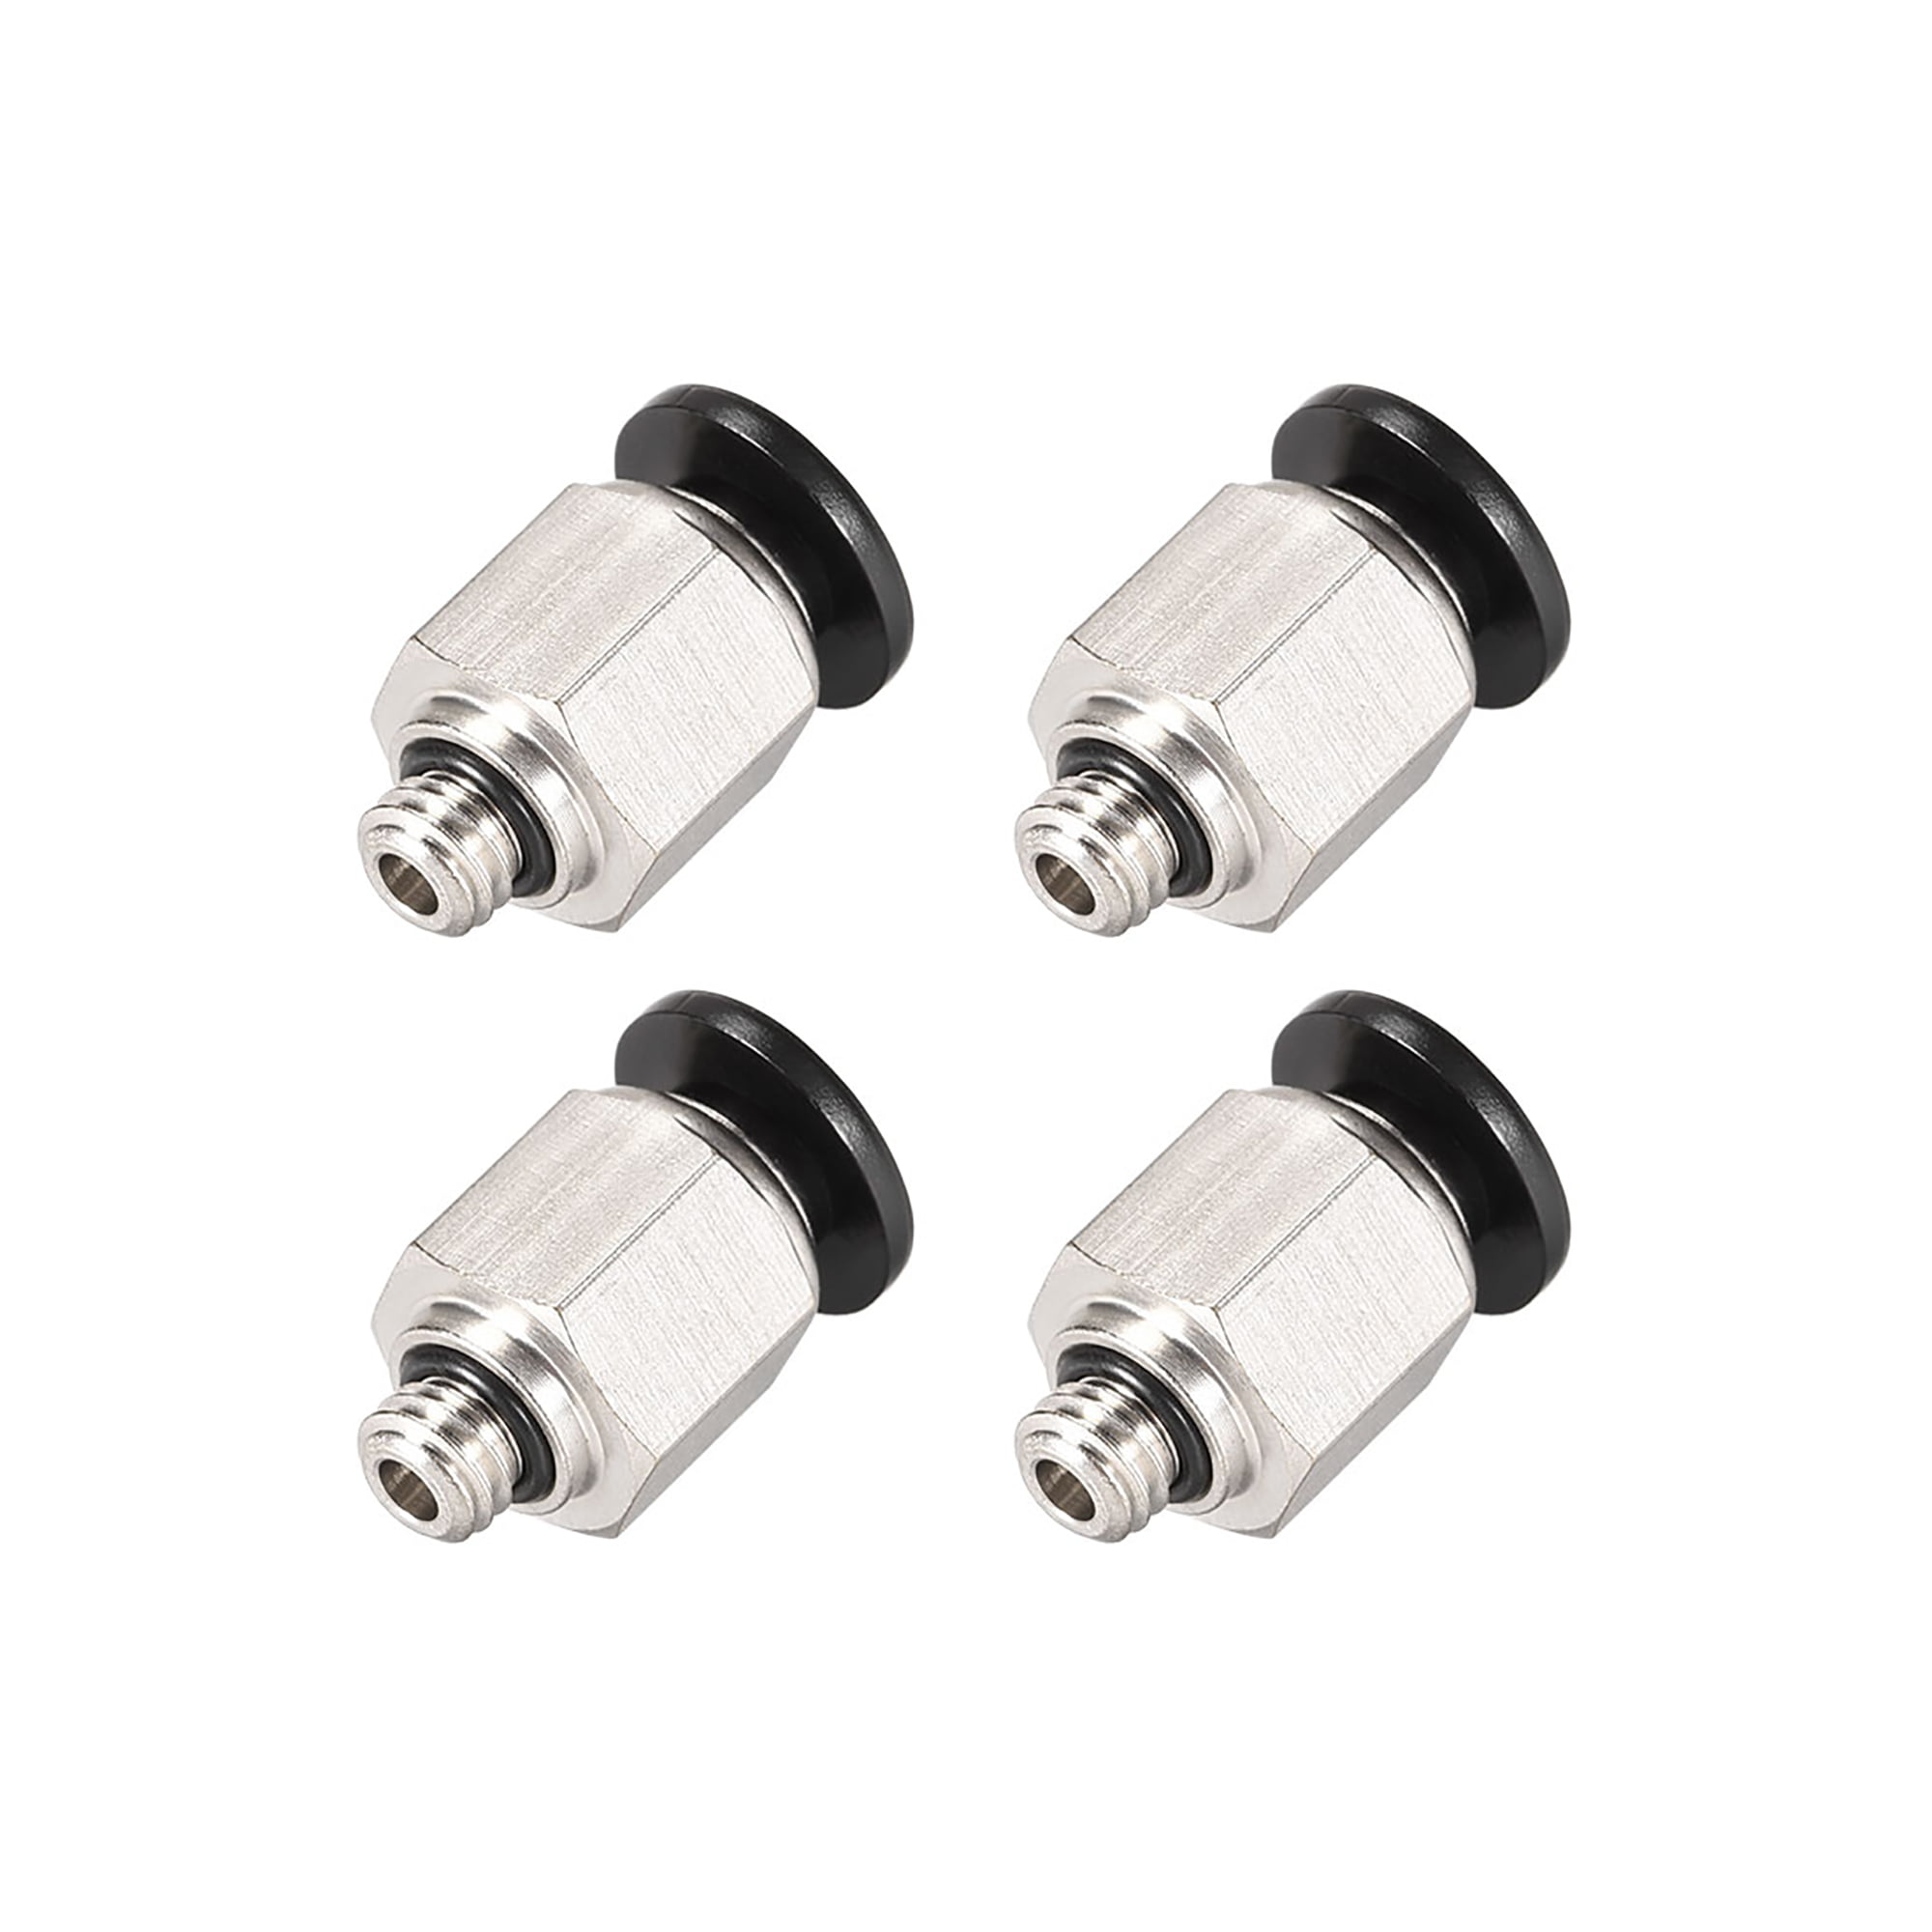 4Pcs 6mm Hose OD Fitting 5mm Thread Metal Pneumatic Air Tube Quick Connector 